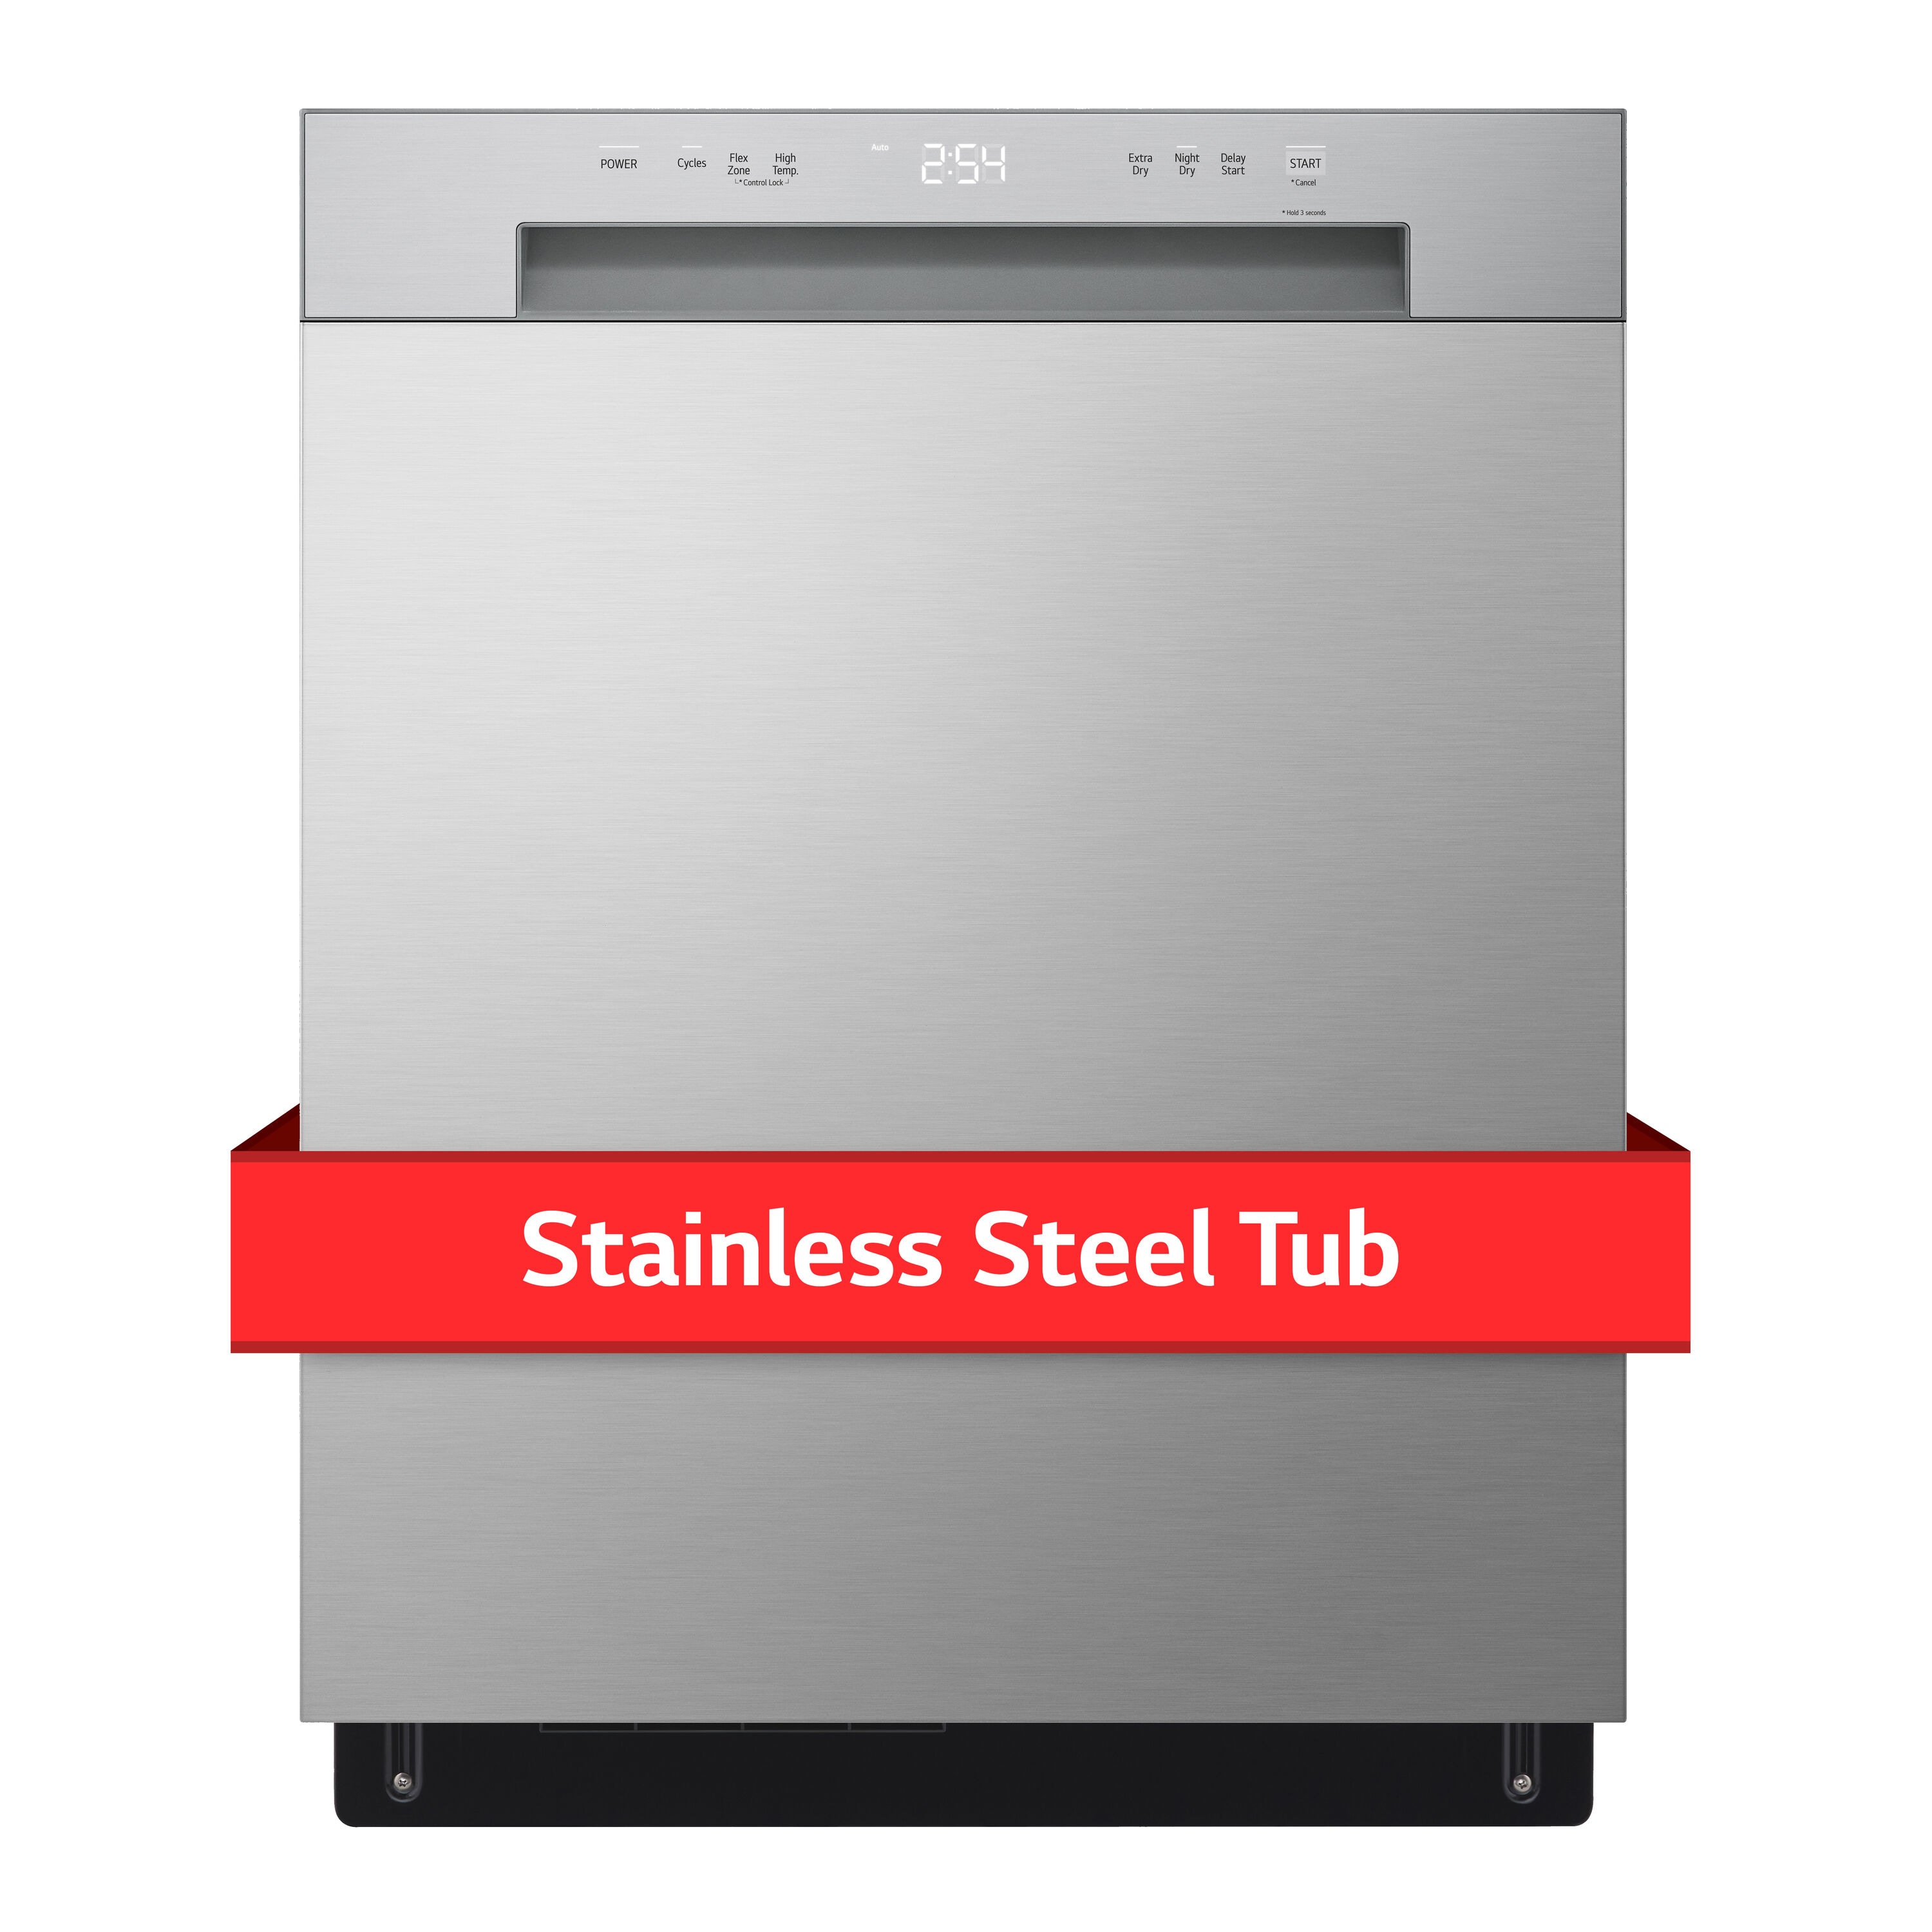 LG Stainless Steel Tub Front Control 24-in Built-In Dishwasher (Stainless  Steel Look) ENERGY STAR, 52-dBA